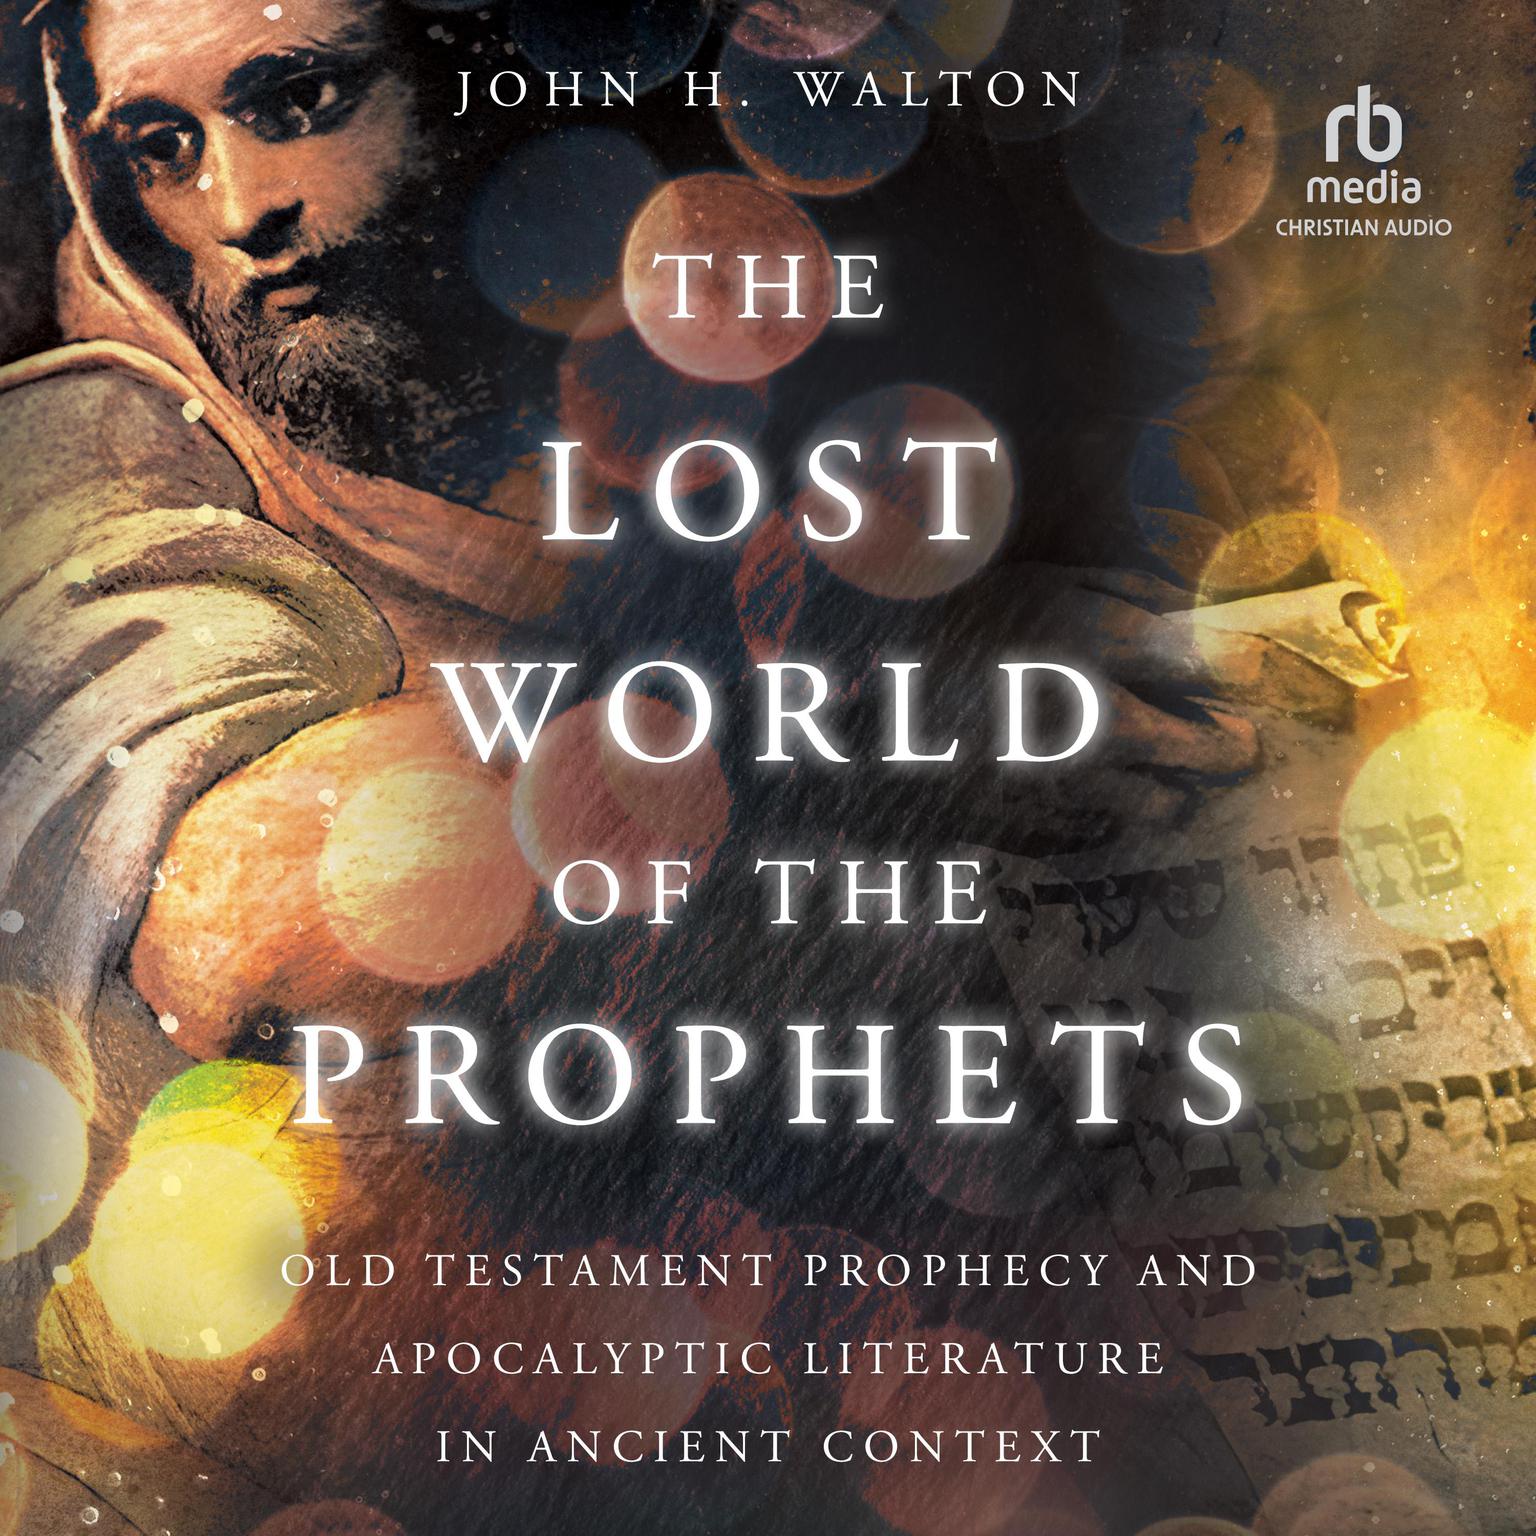 The Lost World of the Prophets: Old Testament Prophecy and Apocalyptic Literature in Ancient Context Audiobook, by John H. Walton